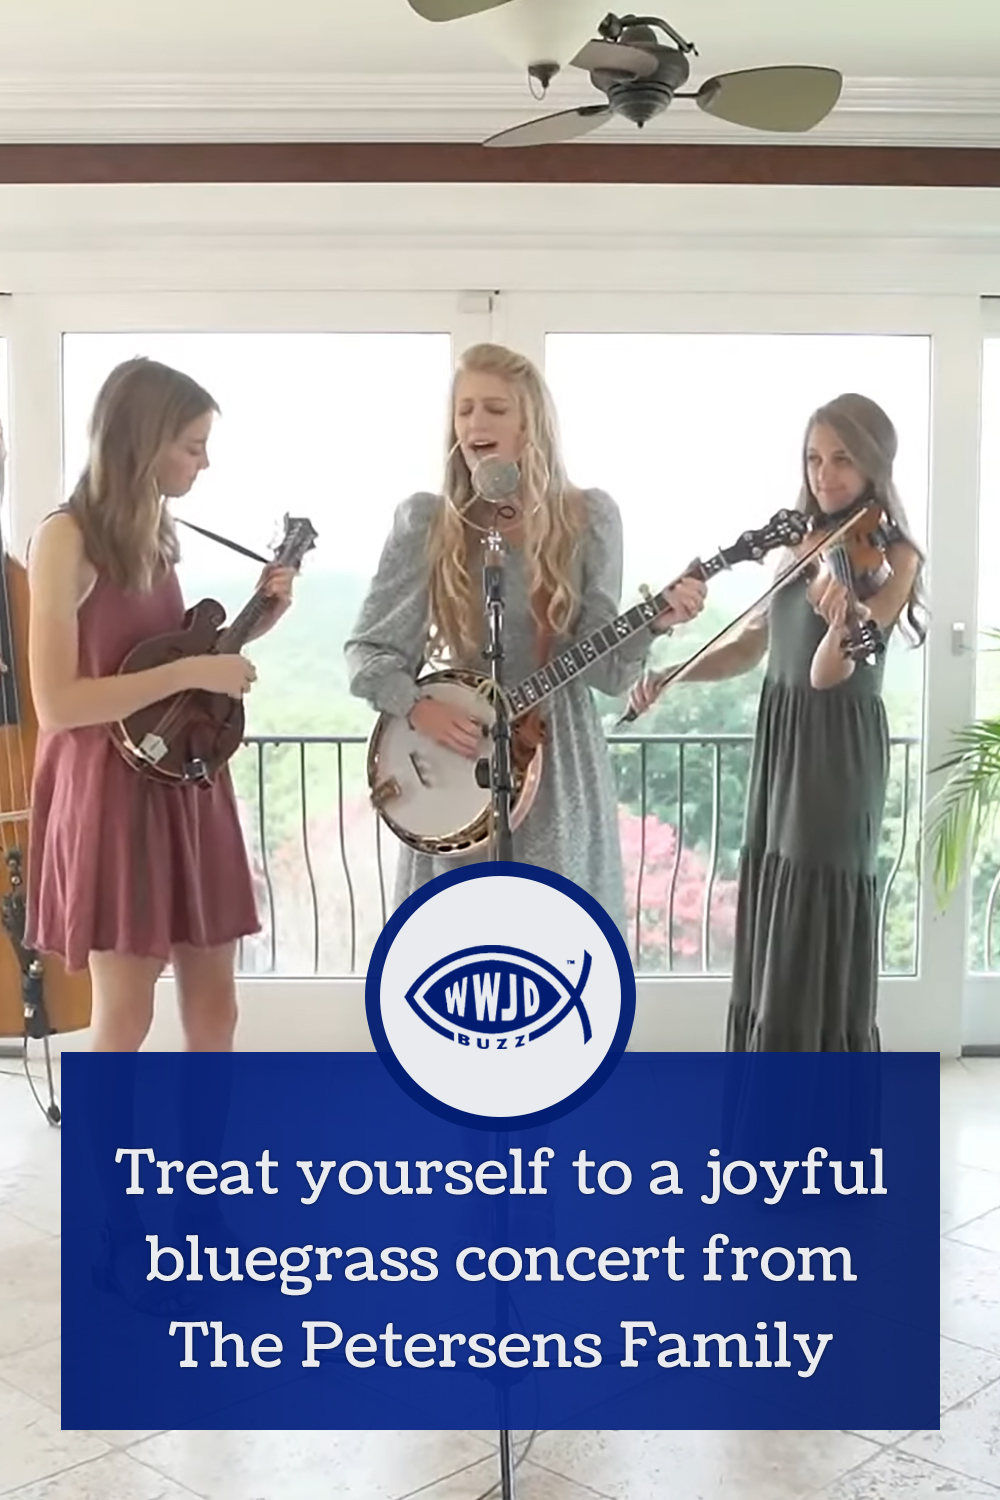 Treat yourself to a joyful bluegrass concert from The Petersens Family